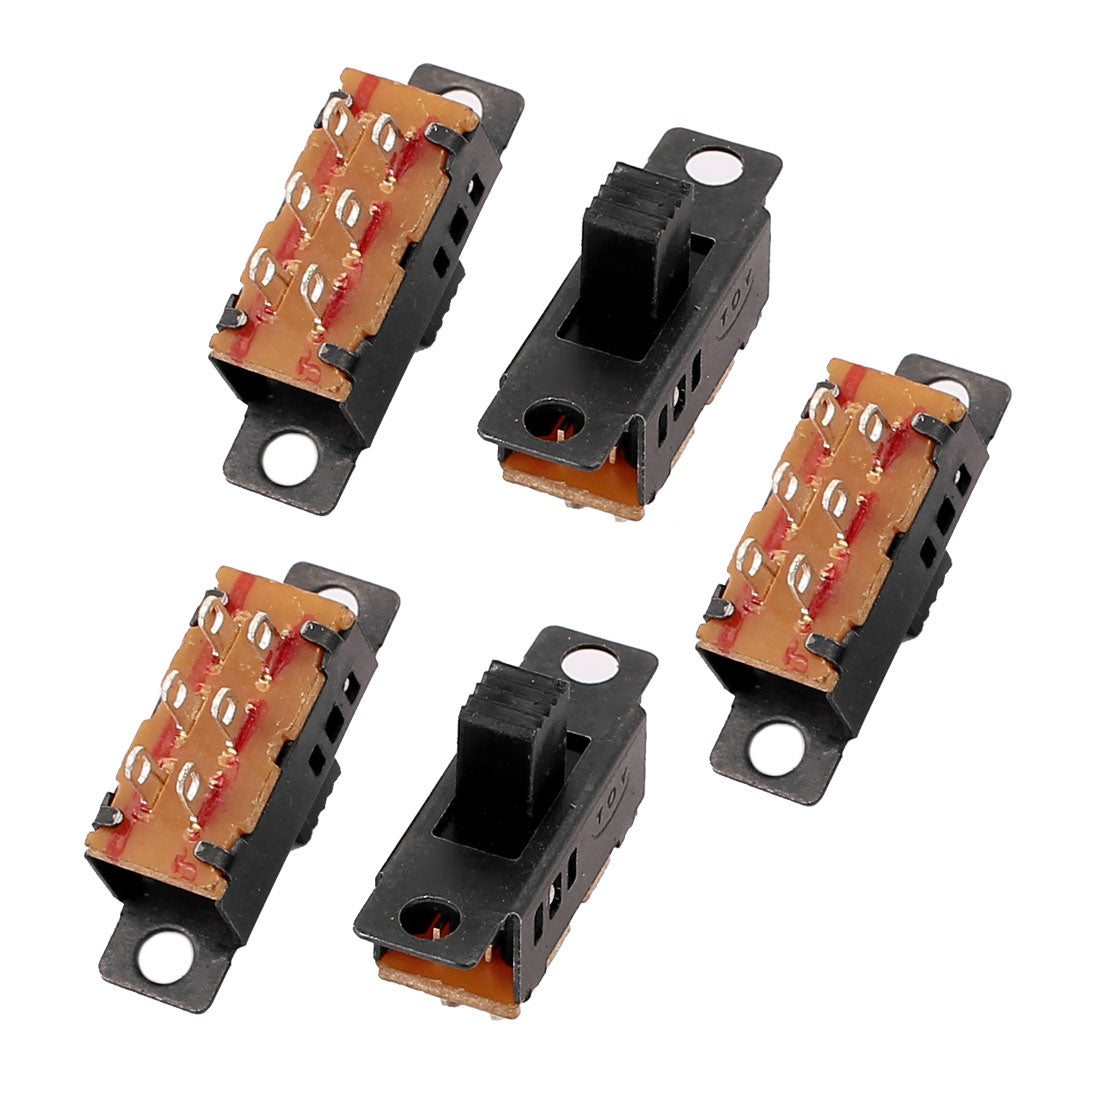 uxcell Uxcell 5Pcs 3 Position 6P DPDT Micro Miniature PCB Slide Switch Latching Toggle Switch